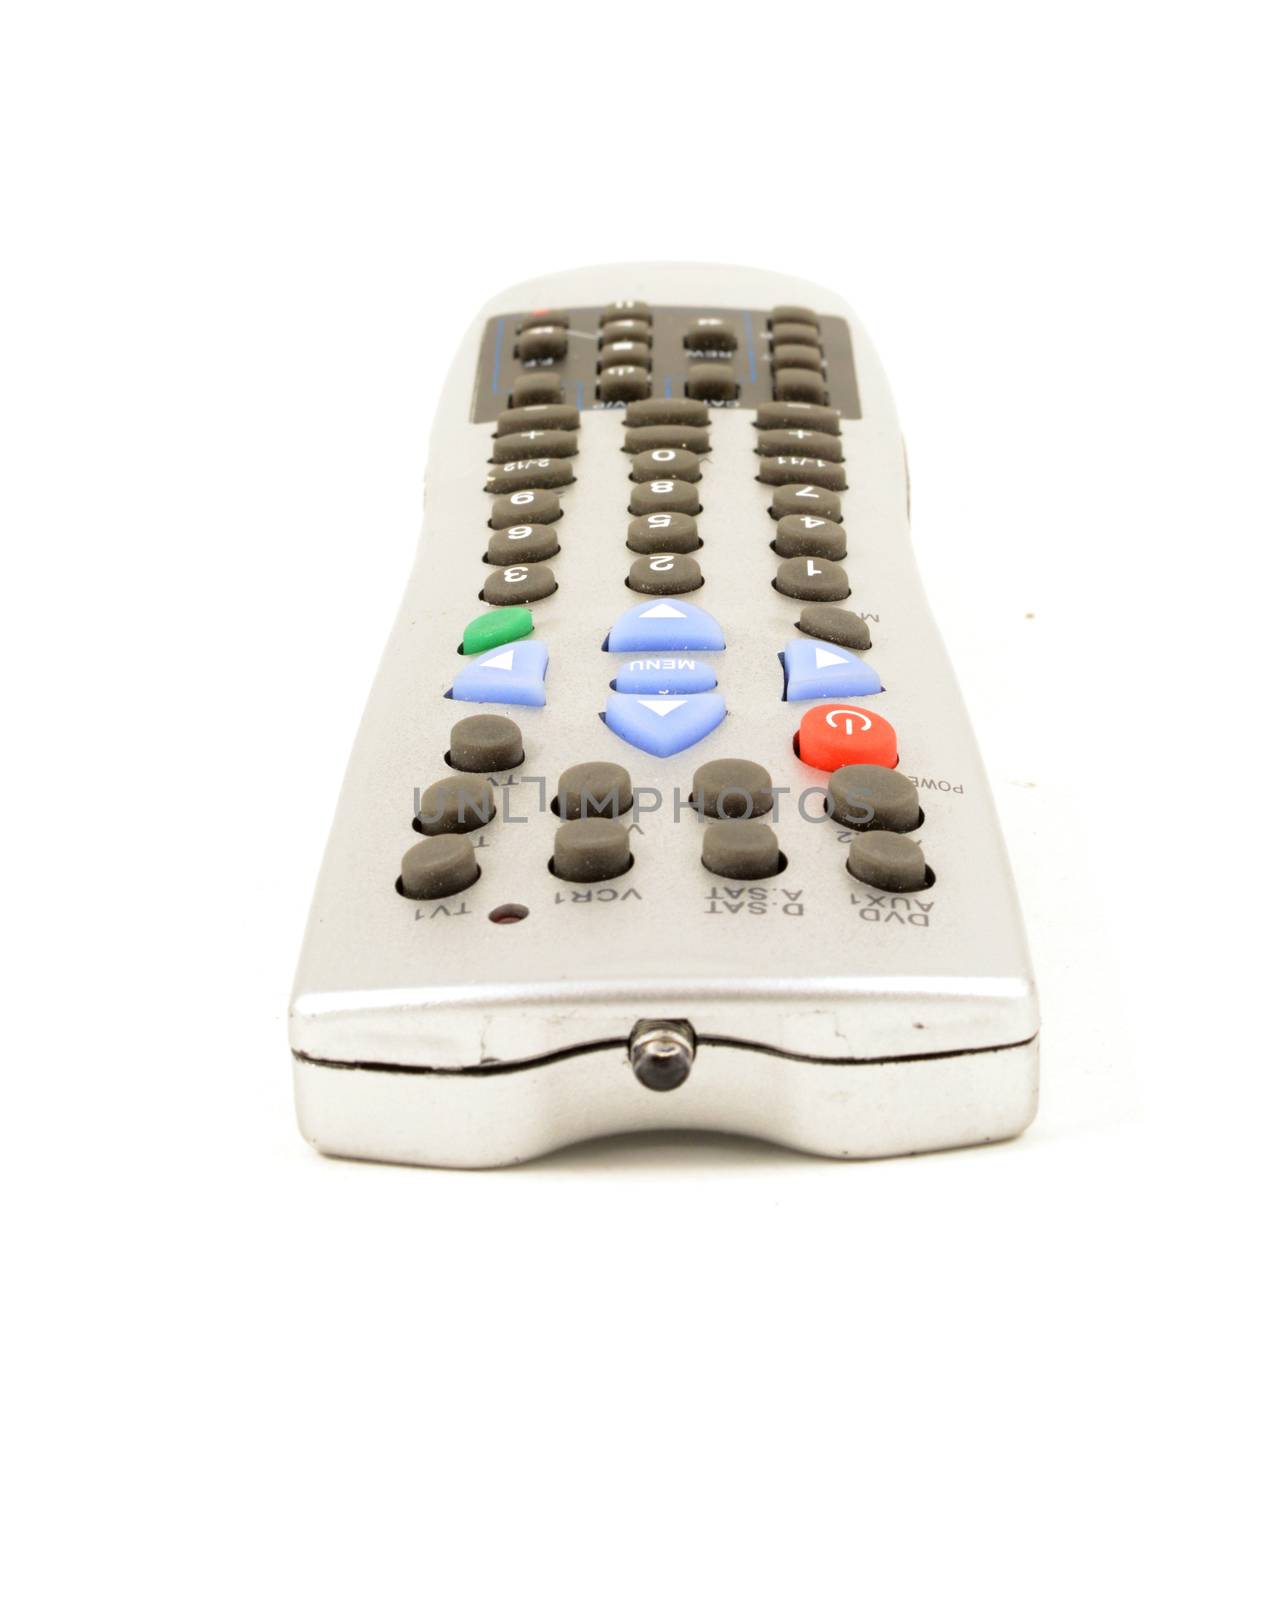 Universal Remote Controller by AlphaBaby